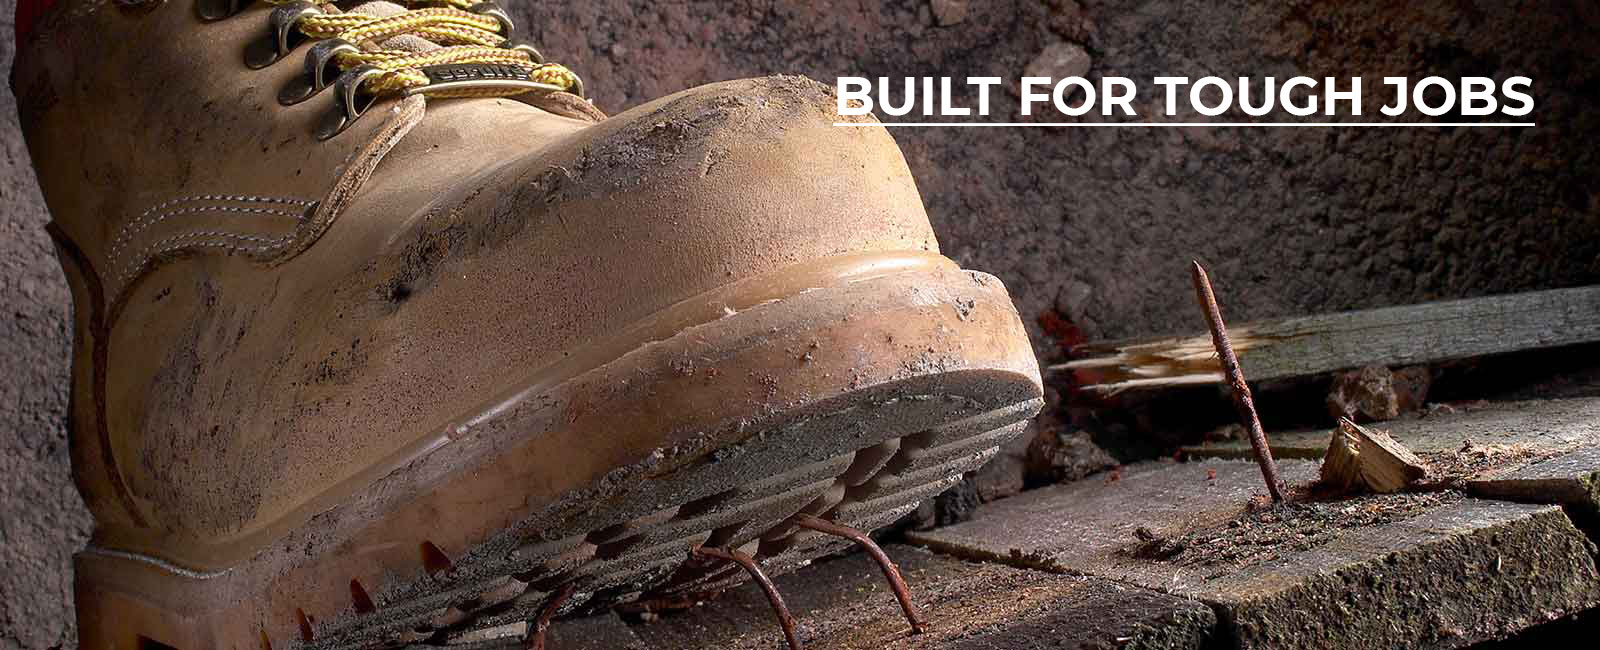 Safety Shoes Manufacturers/Suppliers/Dealers/Exporters in Pune